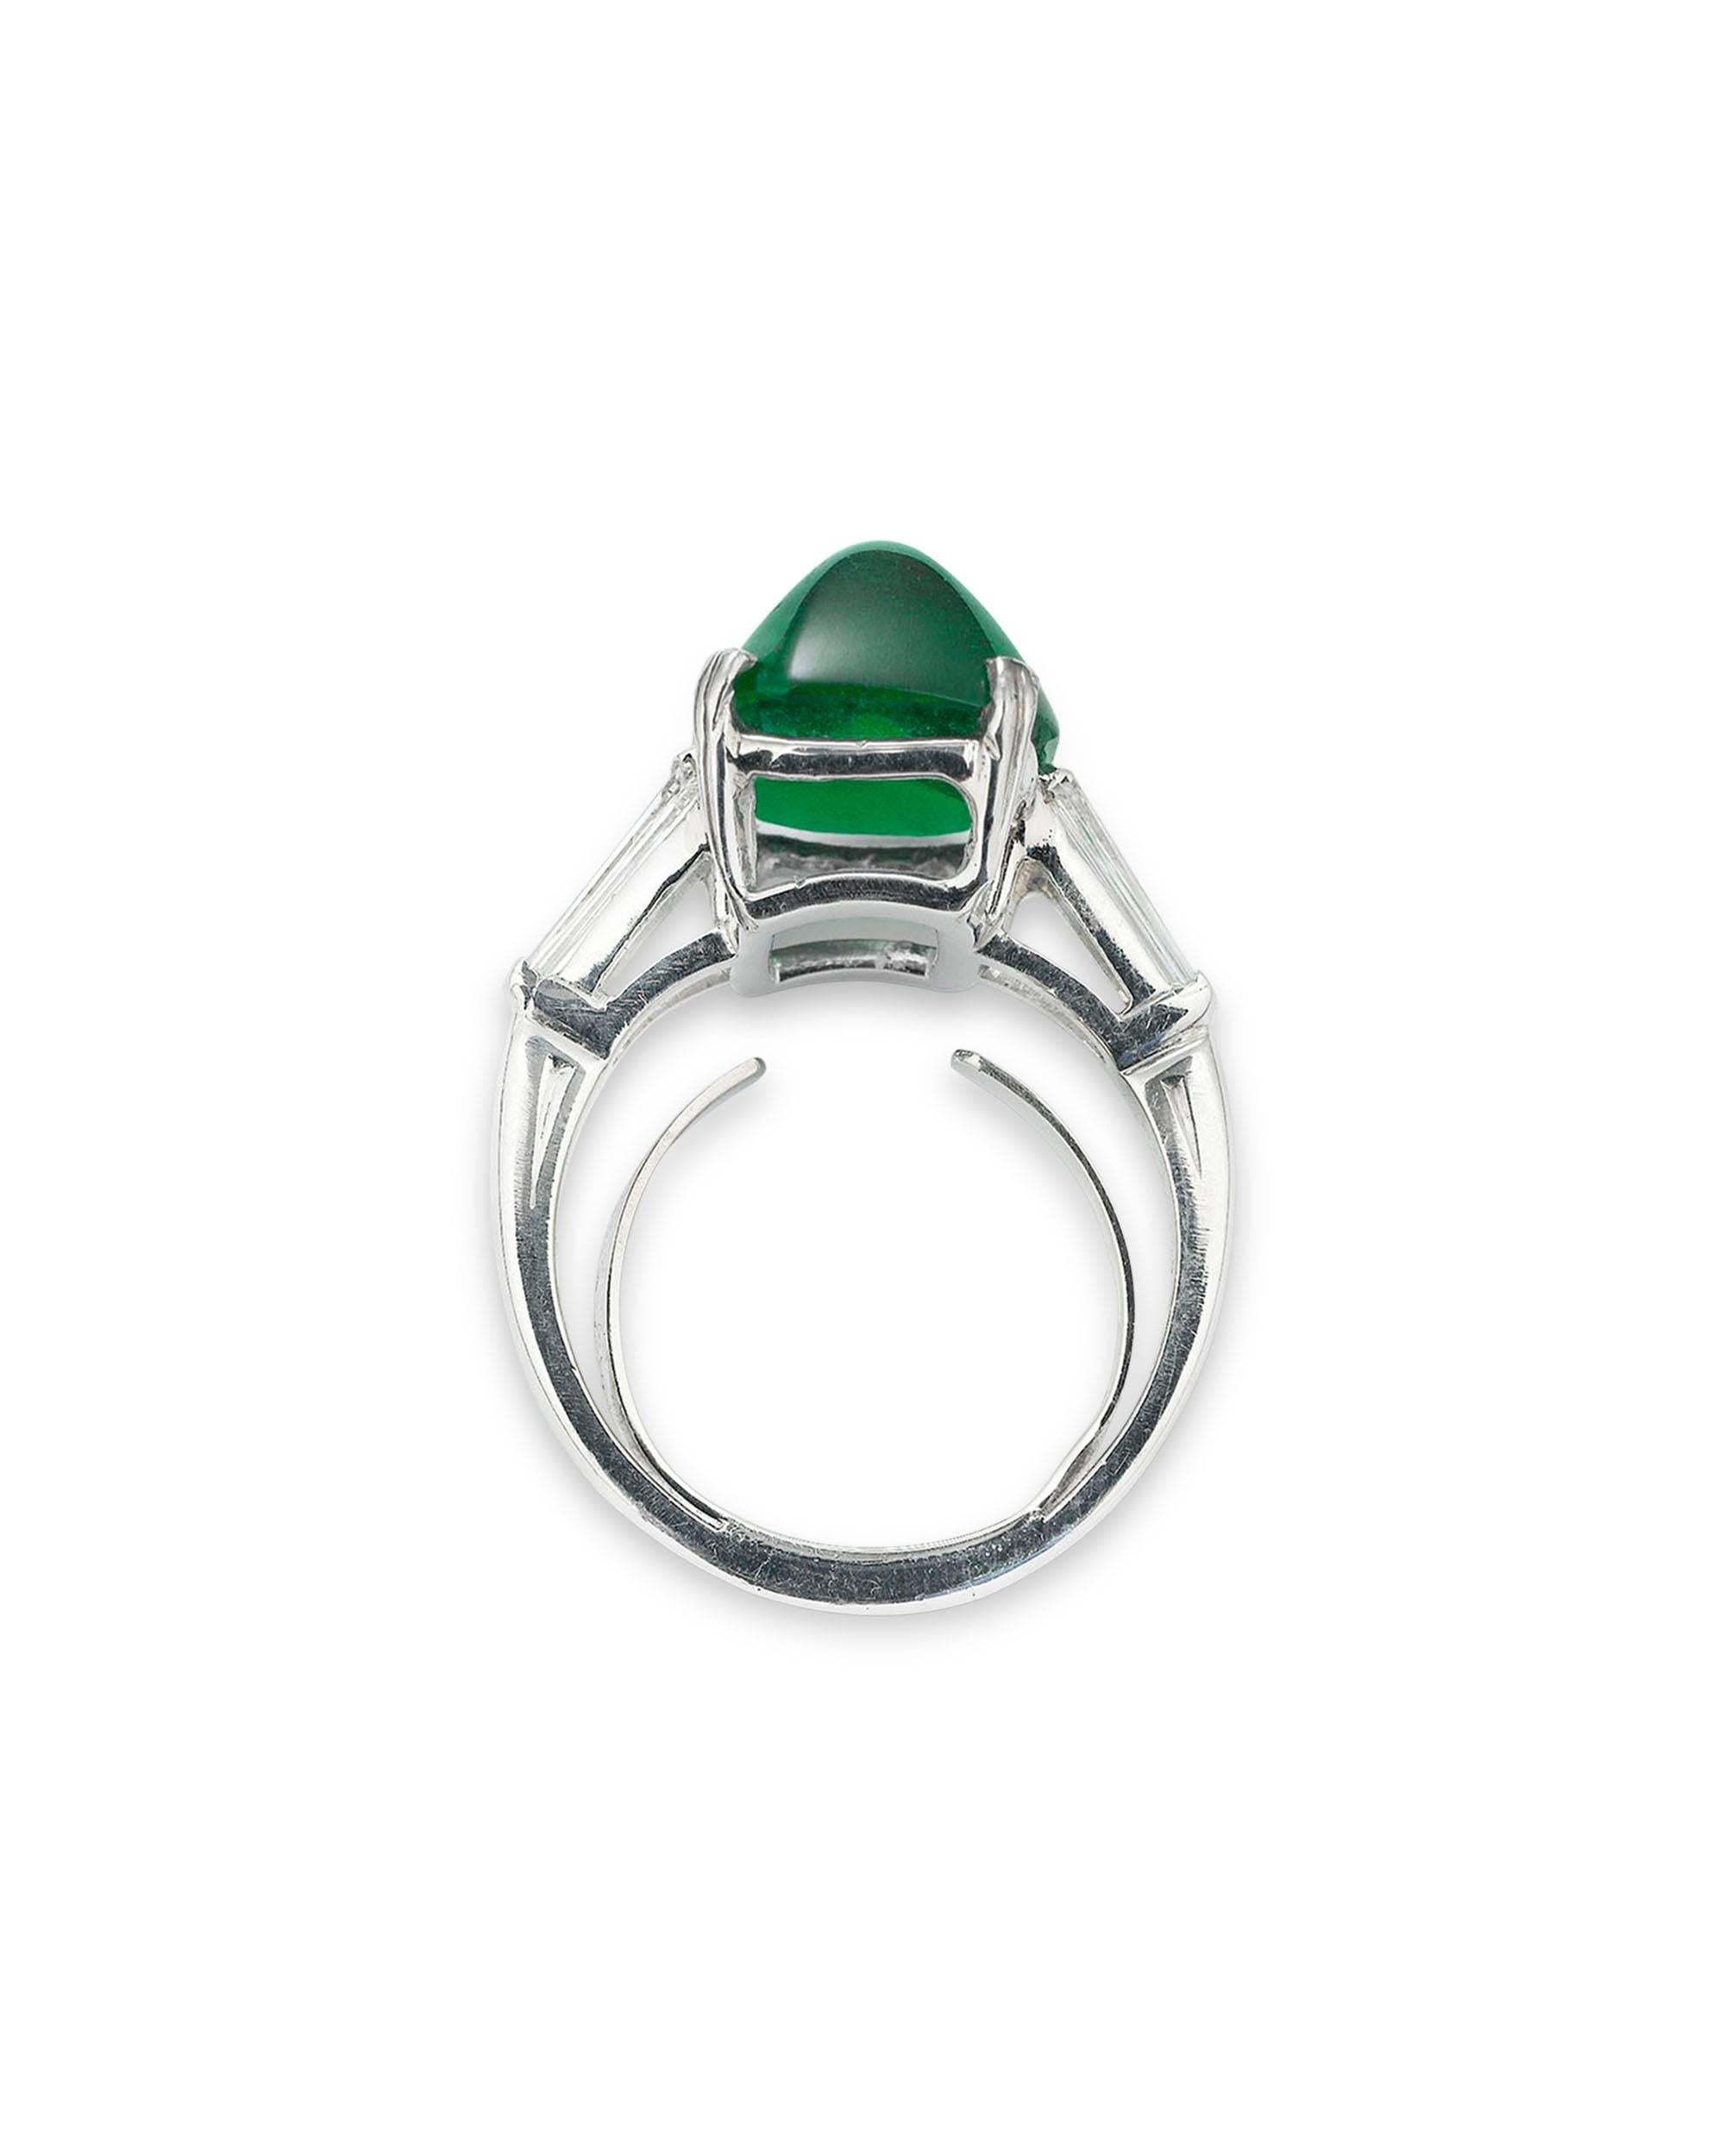 This elegant ring by the renowned Oscar Heyman & Brothers showcases a fantastic sugar loaf emerald. Weighing 7.00 carats, this stunning gem's remarkable cut displays its verdant hue flawlessly. Flanked by two channel-set diamonds weighing .40